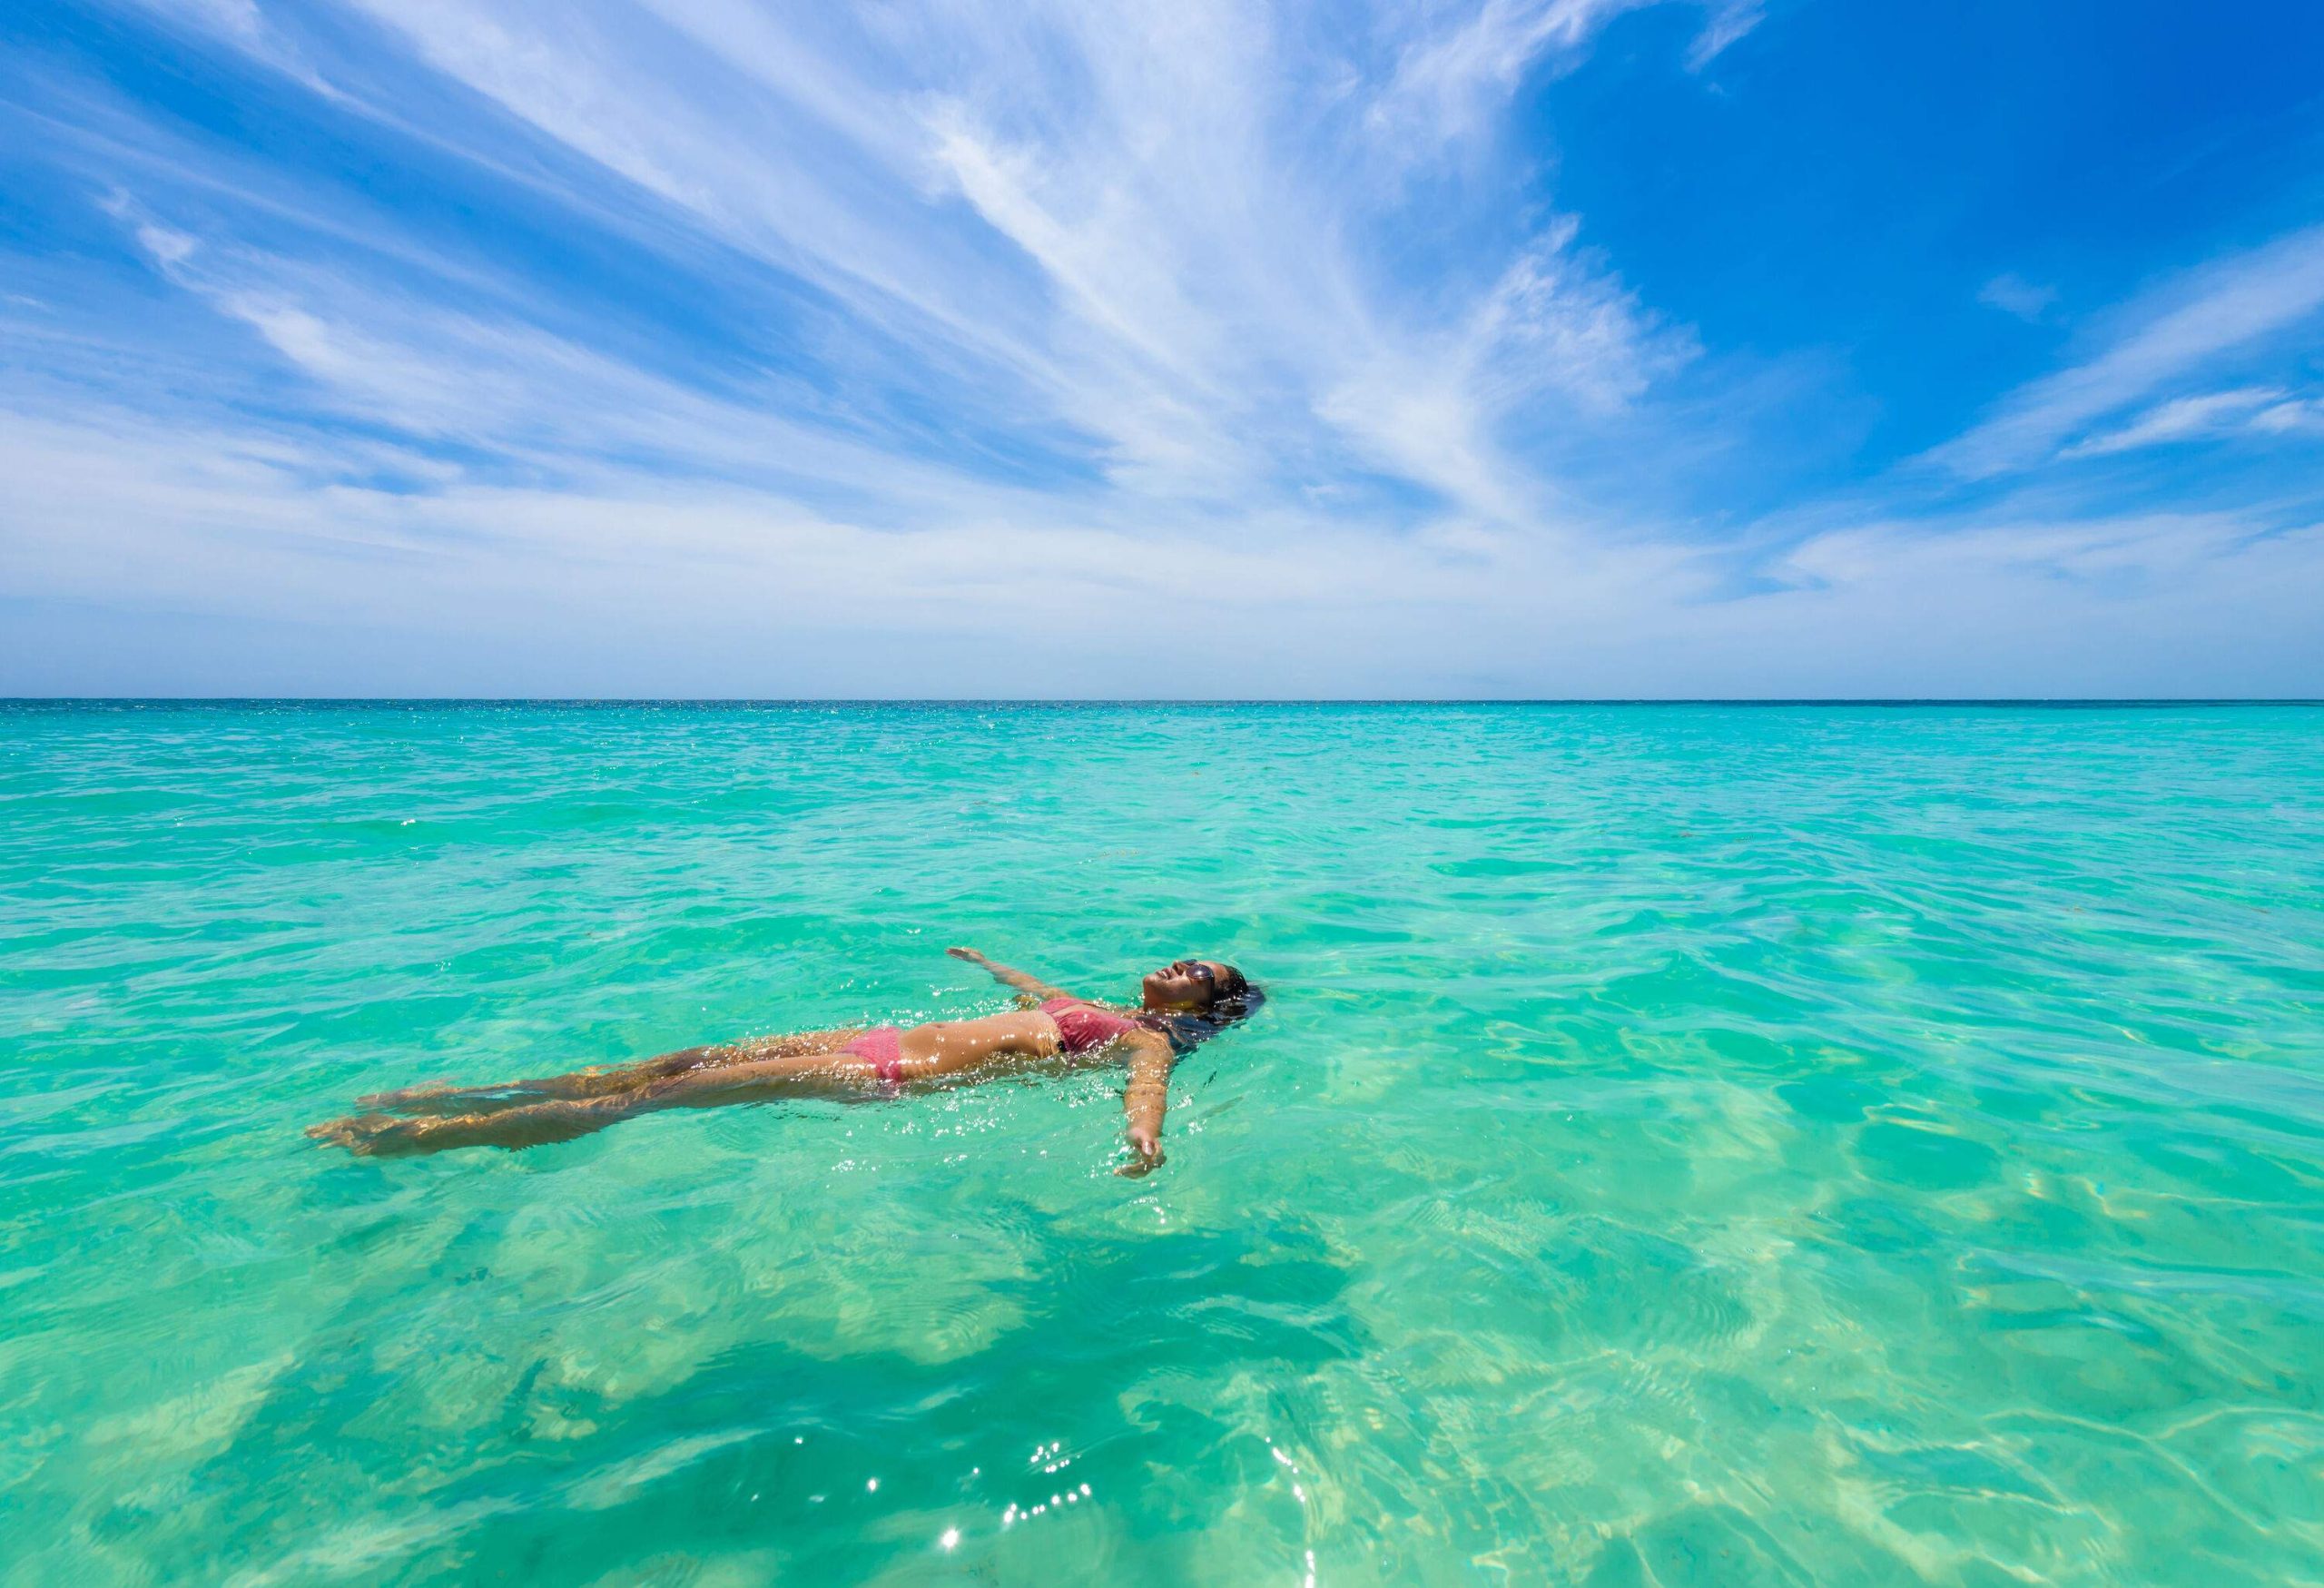 A carefree young woman in a bikini blissfully relaxes in the vibrant turquoise waters, effortlessly back-floating amidst the seemingly endless expanse of the vast sea.